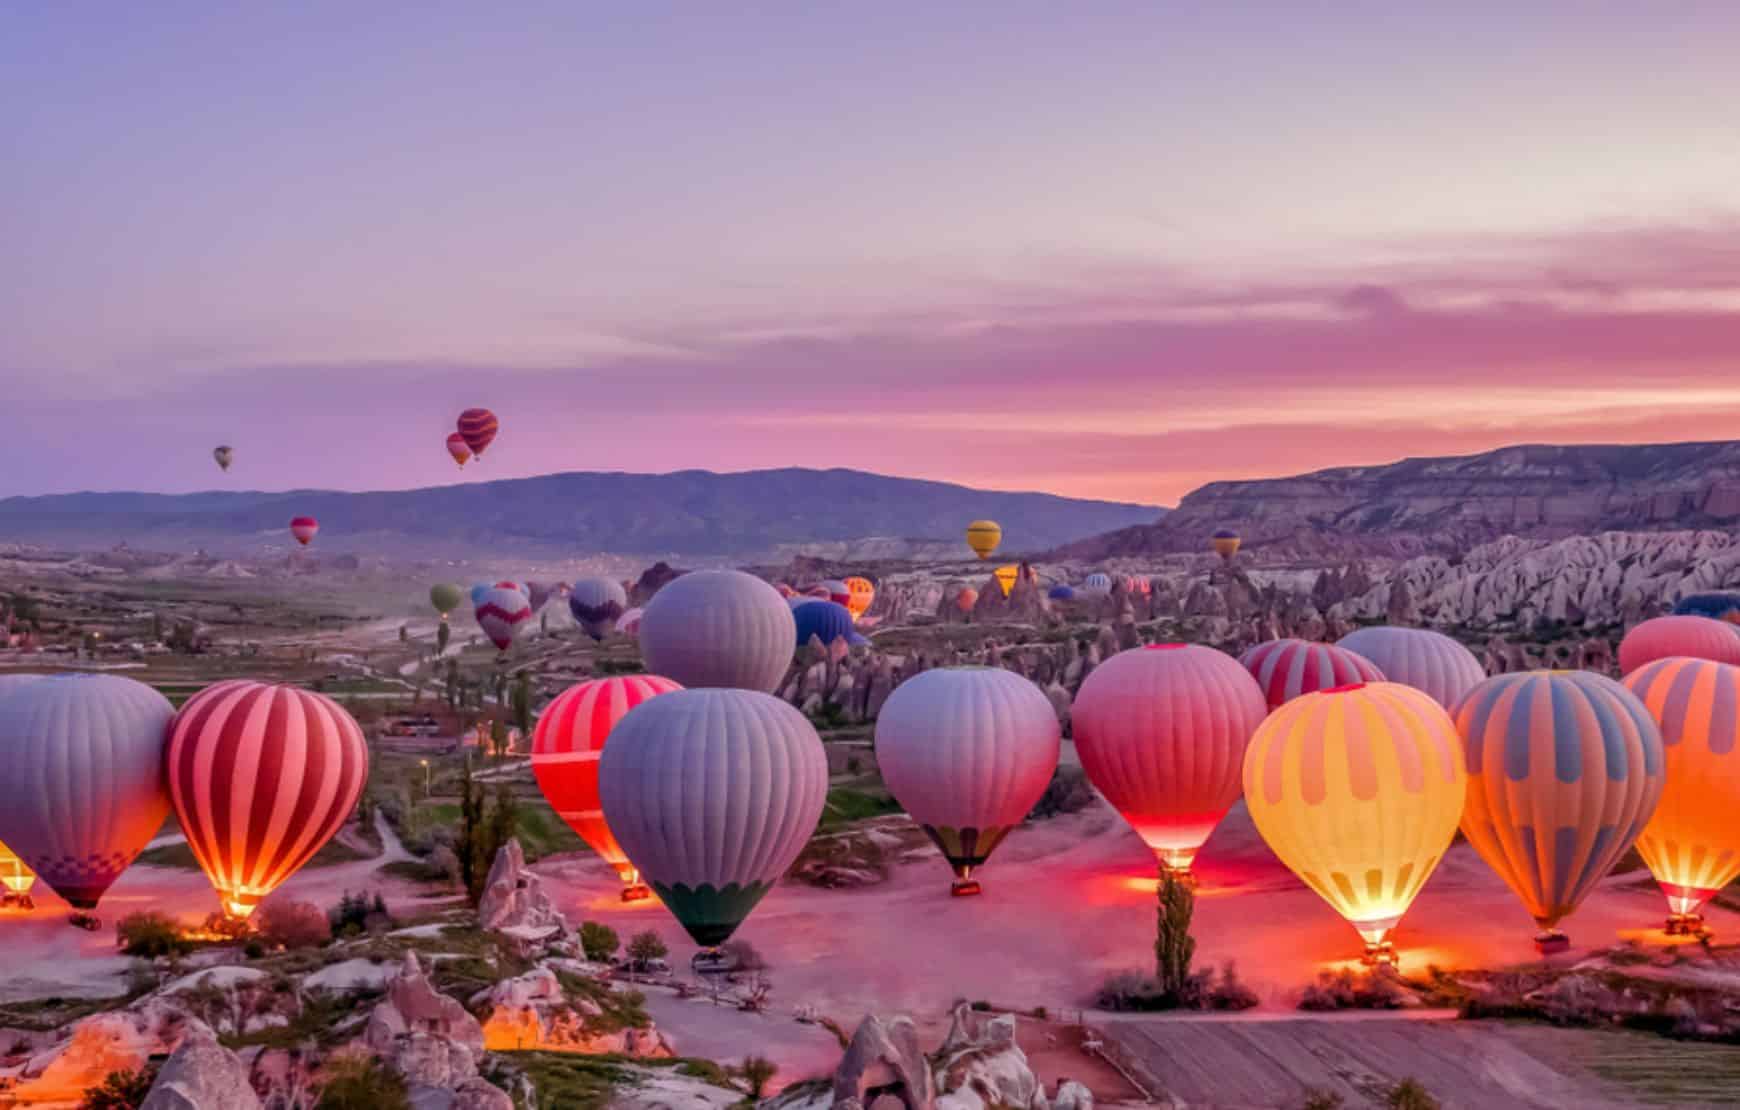 Cappadocia Hot Air Balloon Ride launch site from above take a chance to ride at our Istanbul and Cappadocia Private Tour